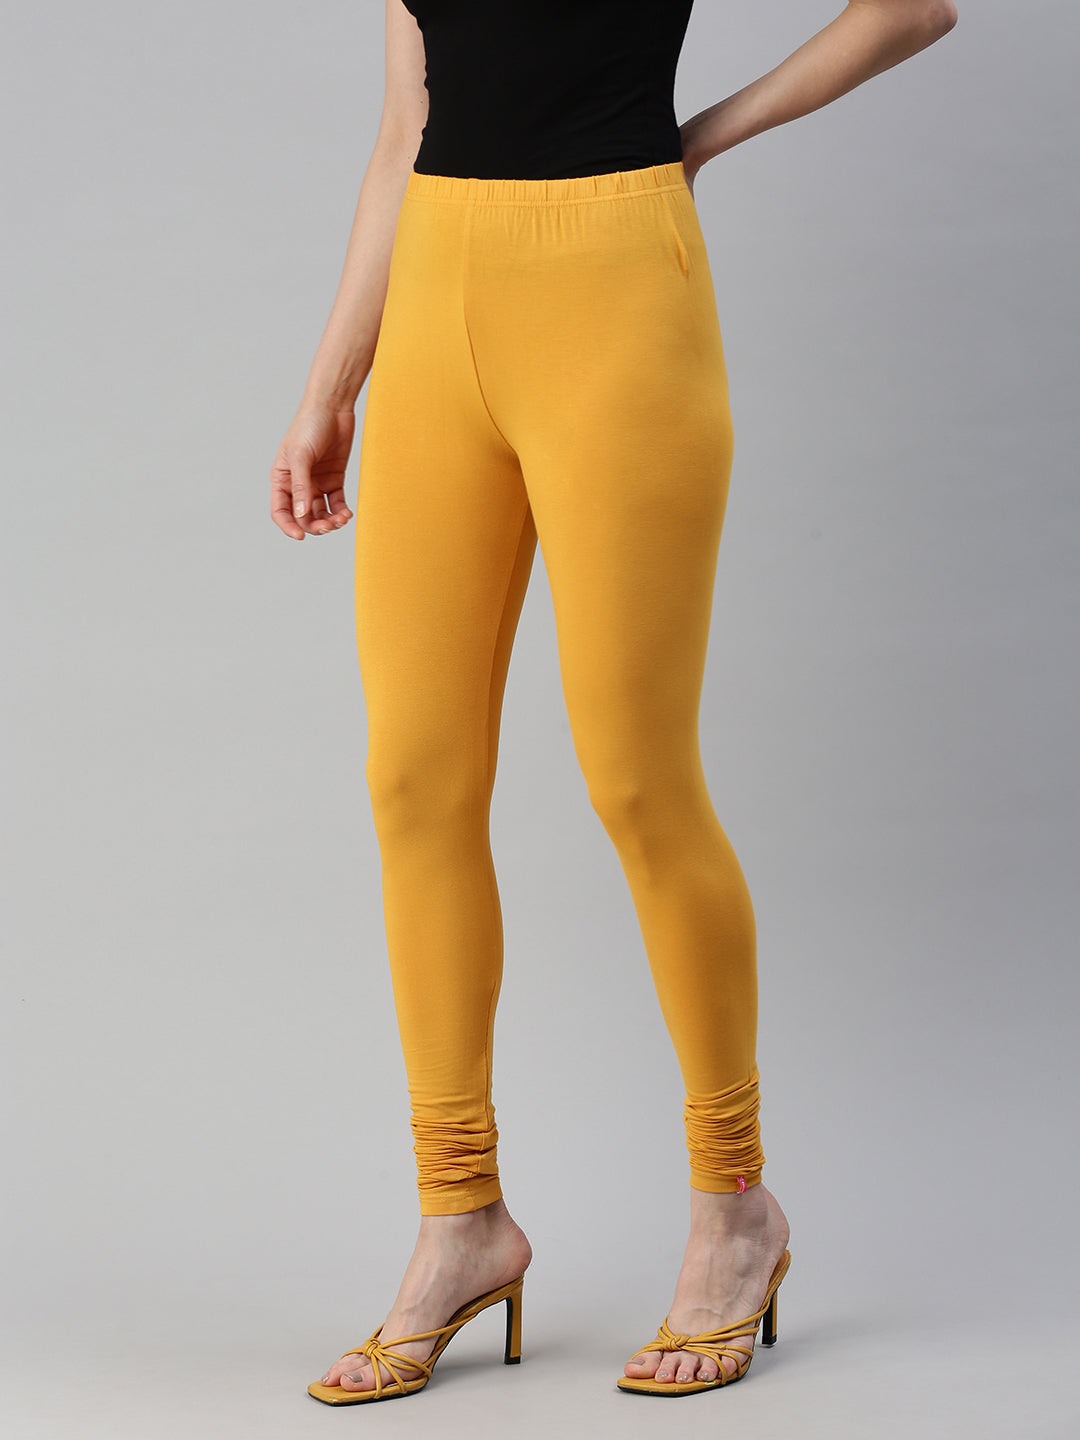 Buy INDIAN FLOWER Women Lycra Churidar legging Yellow color Online at Low  Prices in India - Paytmmall.com